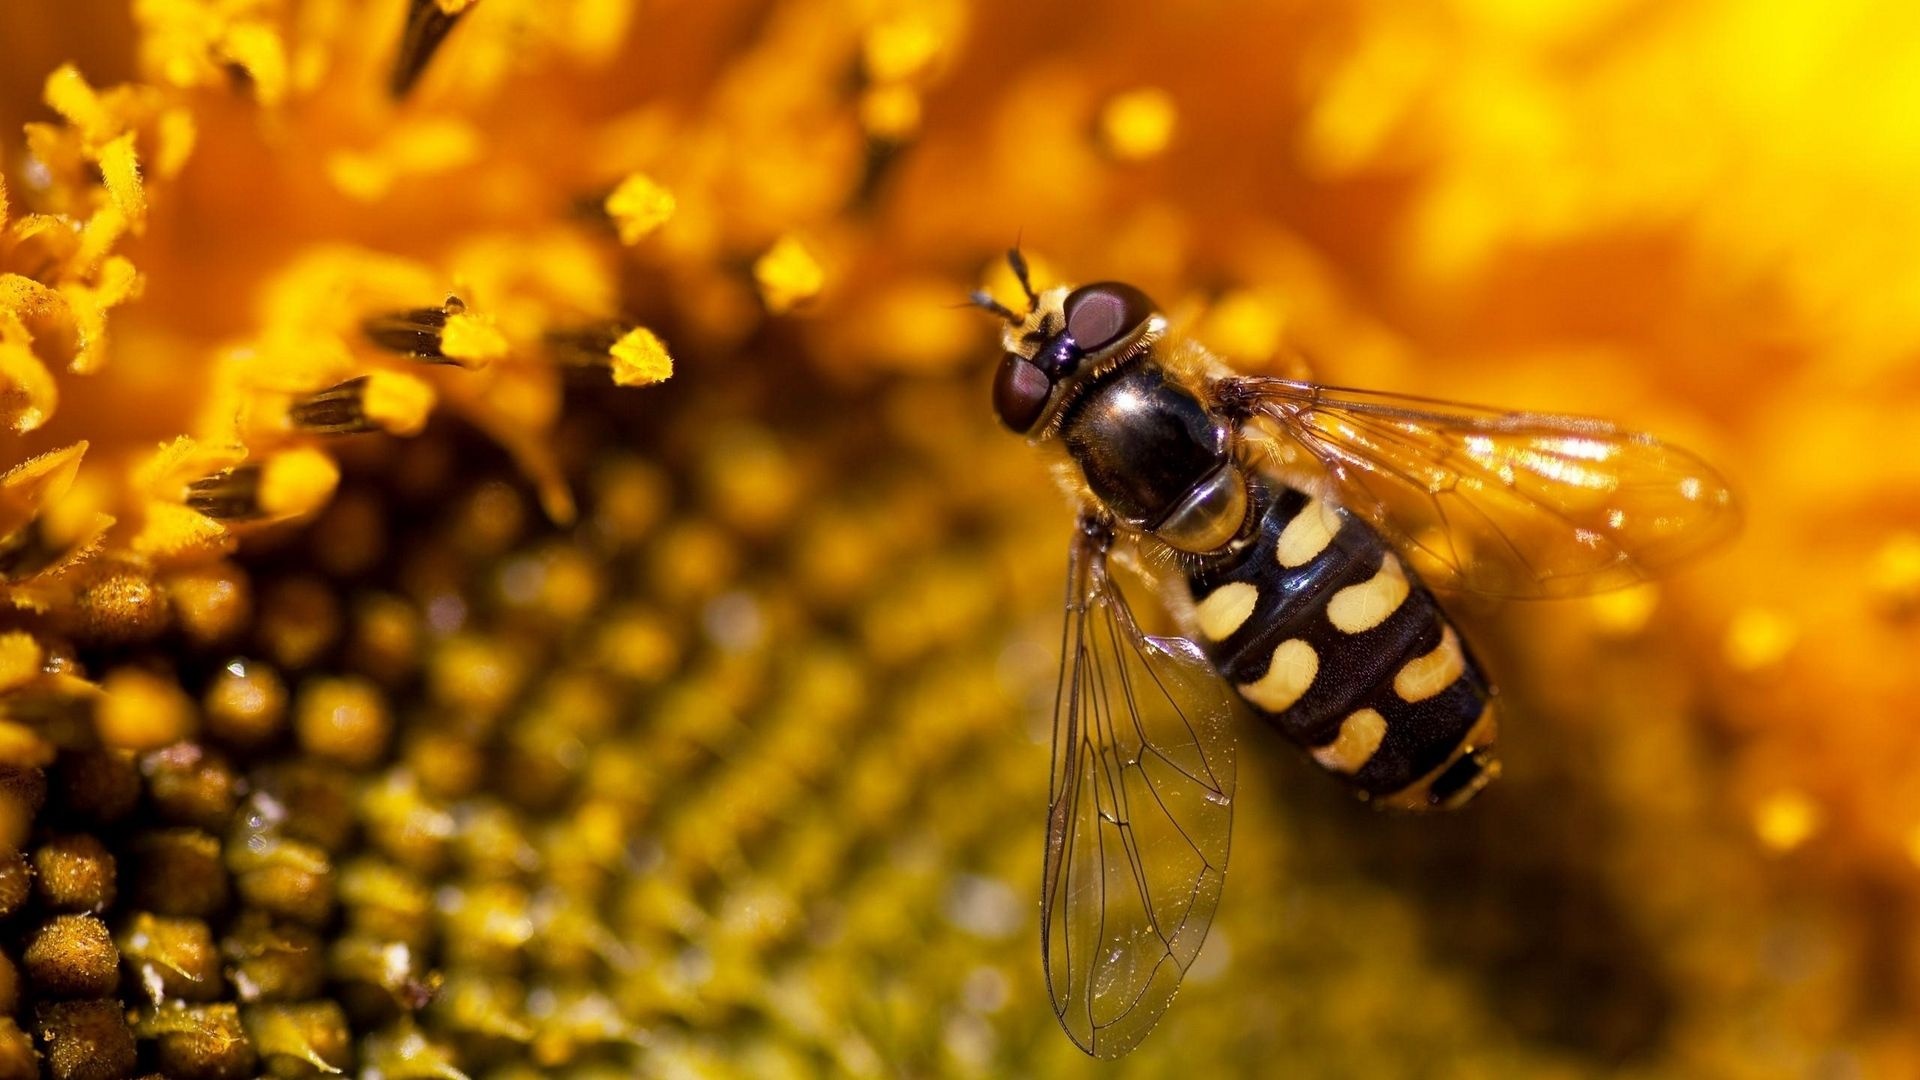 Bee: A flying insect closely related to wasps and flies. 1920x1080 Full HD Wallpaper.